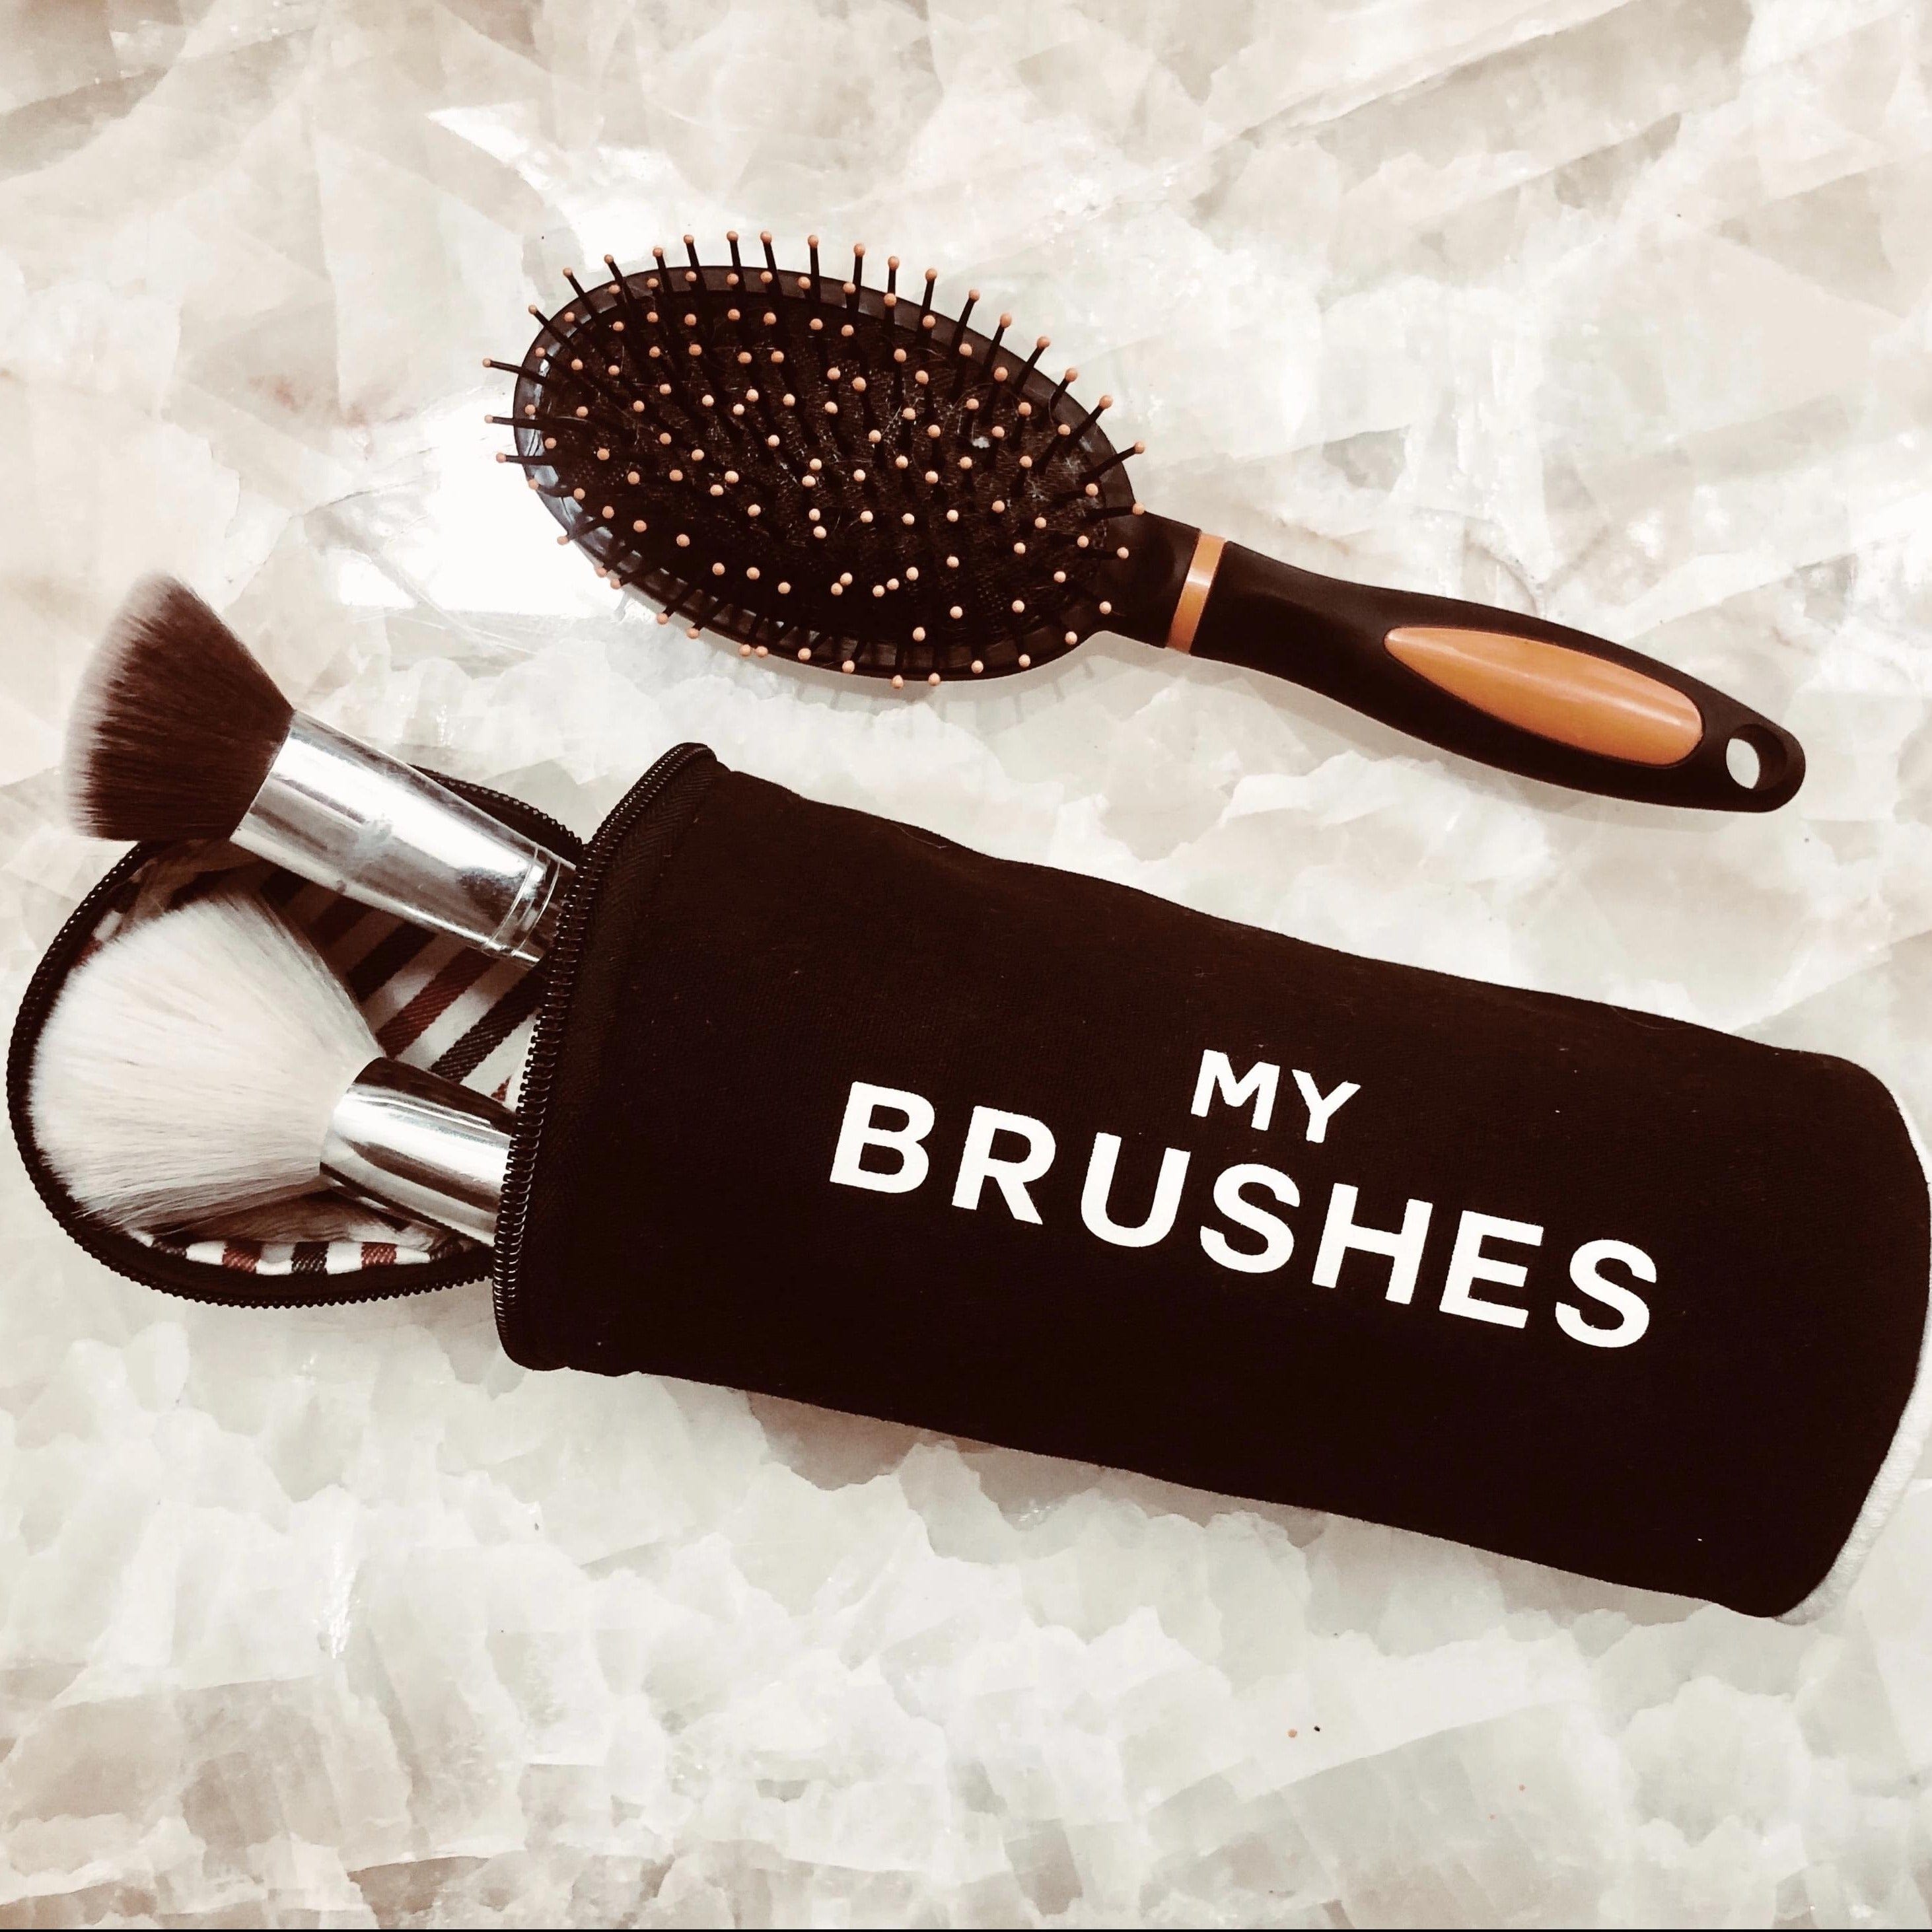 My brushes case with makeup brushes inside. 